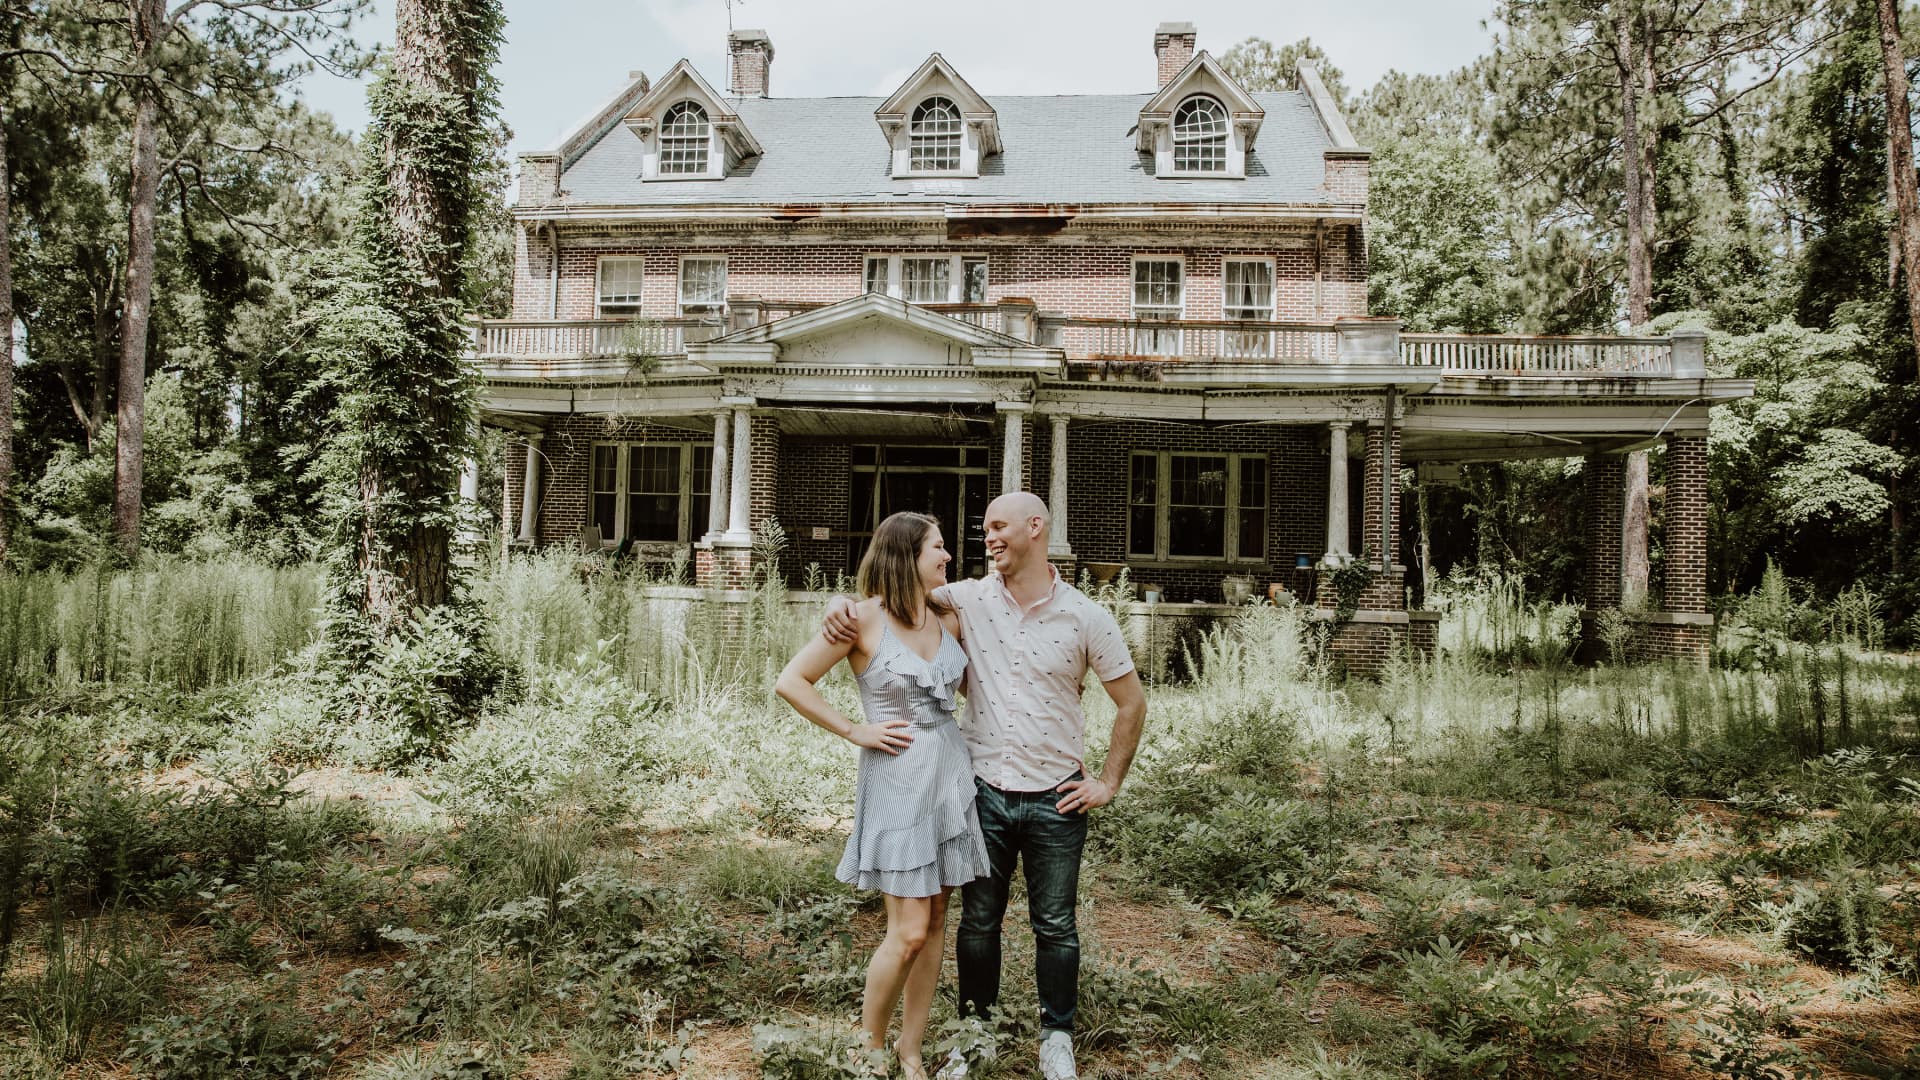 Look inside renovated 109-year-old mansion in North Carolina